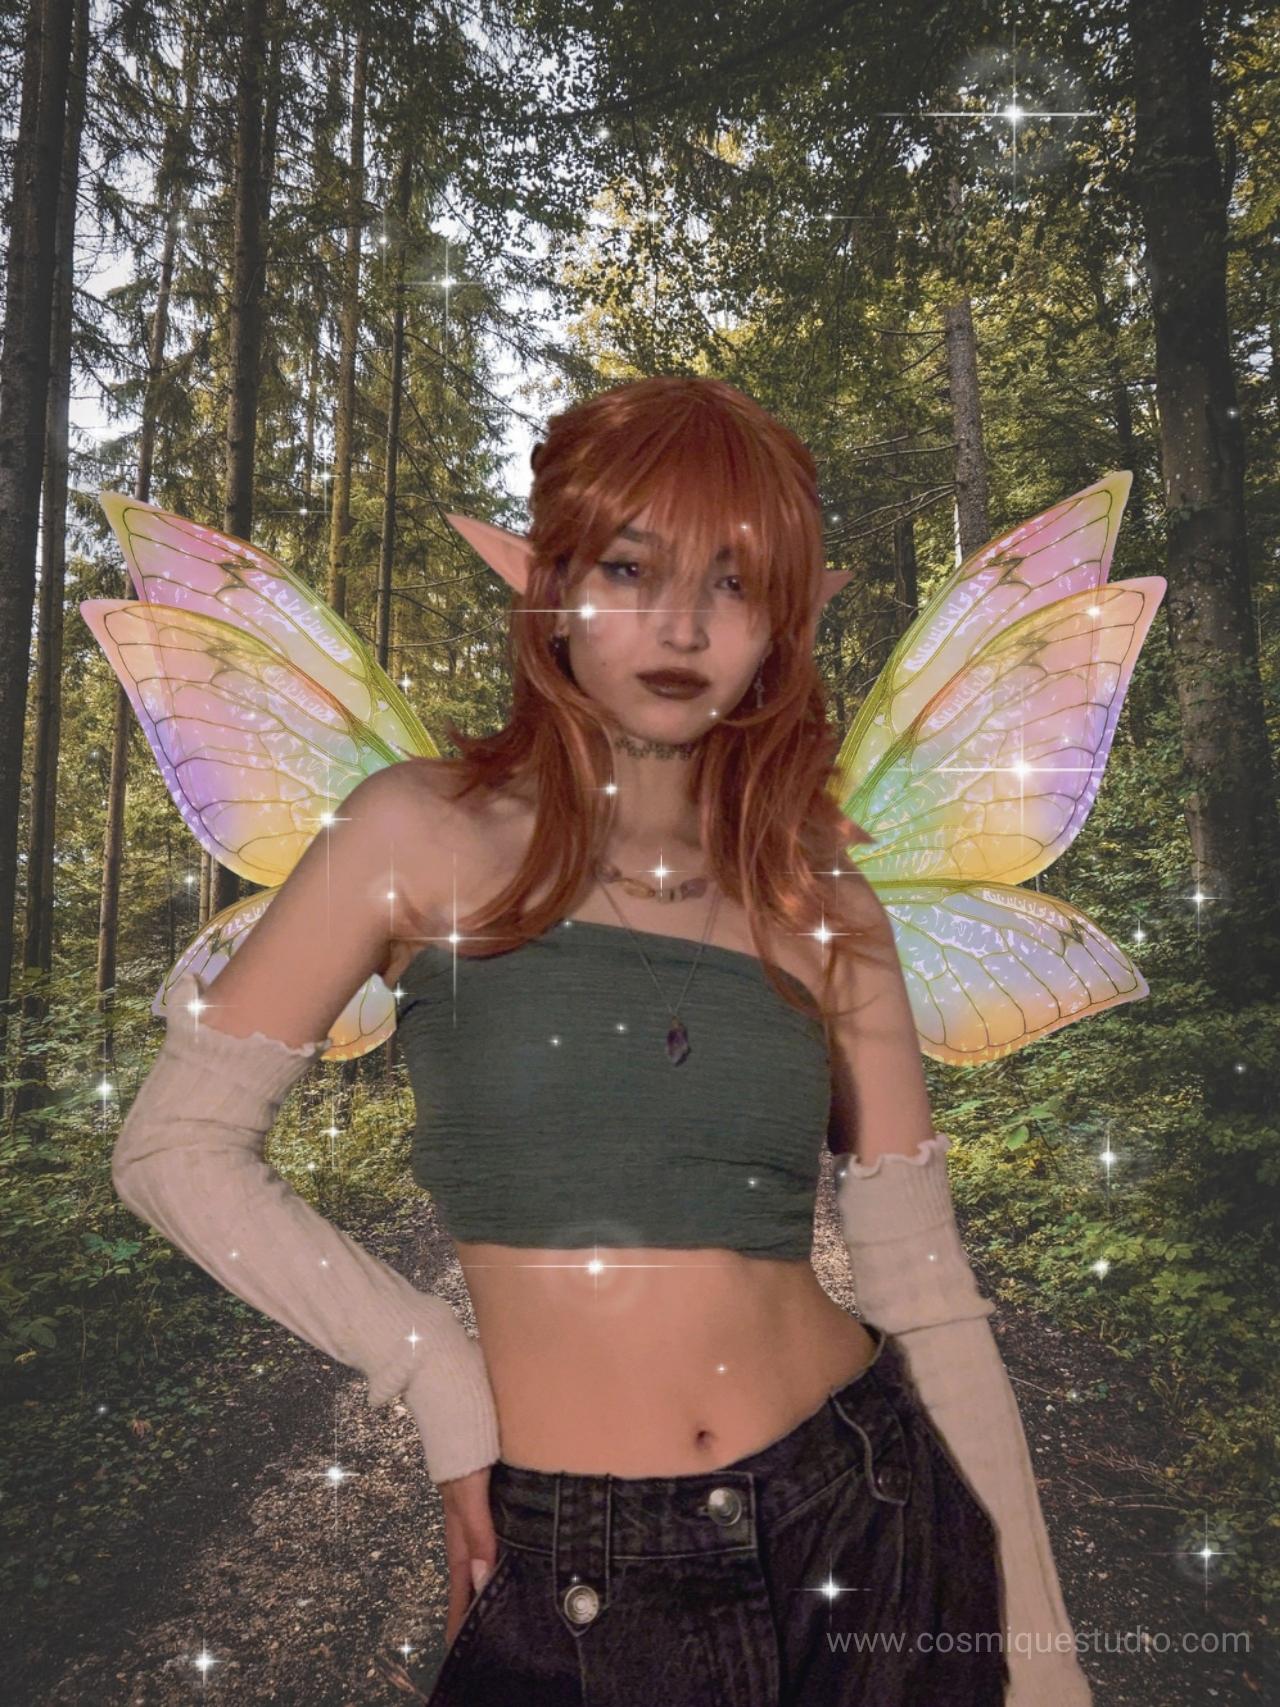 A girl who has fairy wings and elf ears standing in the forest wearing a green crop top.